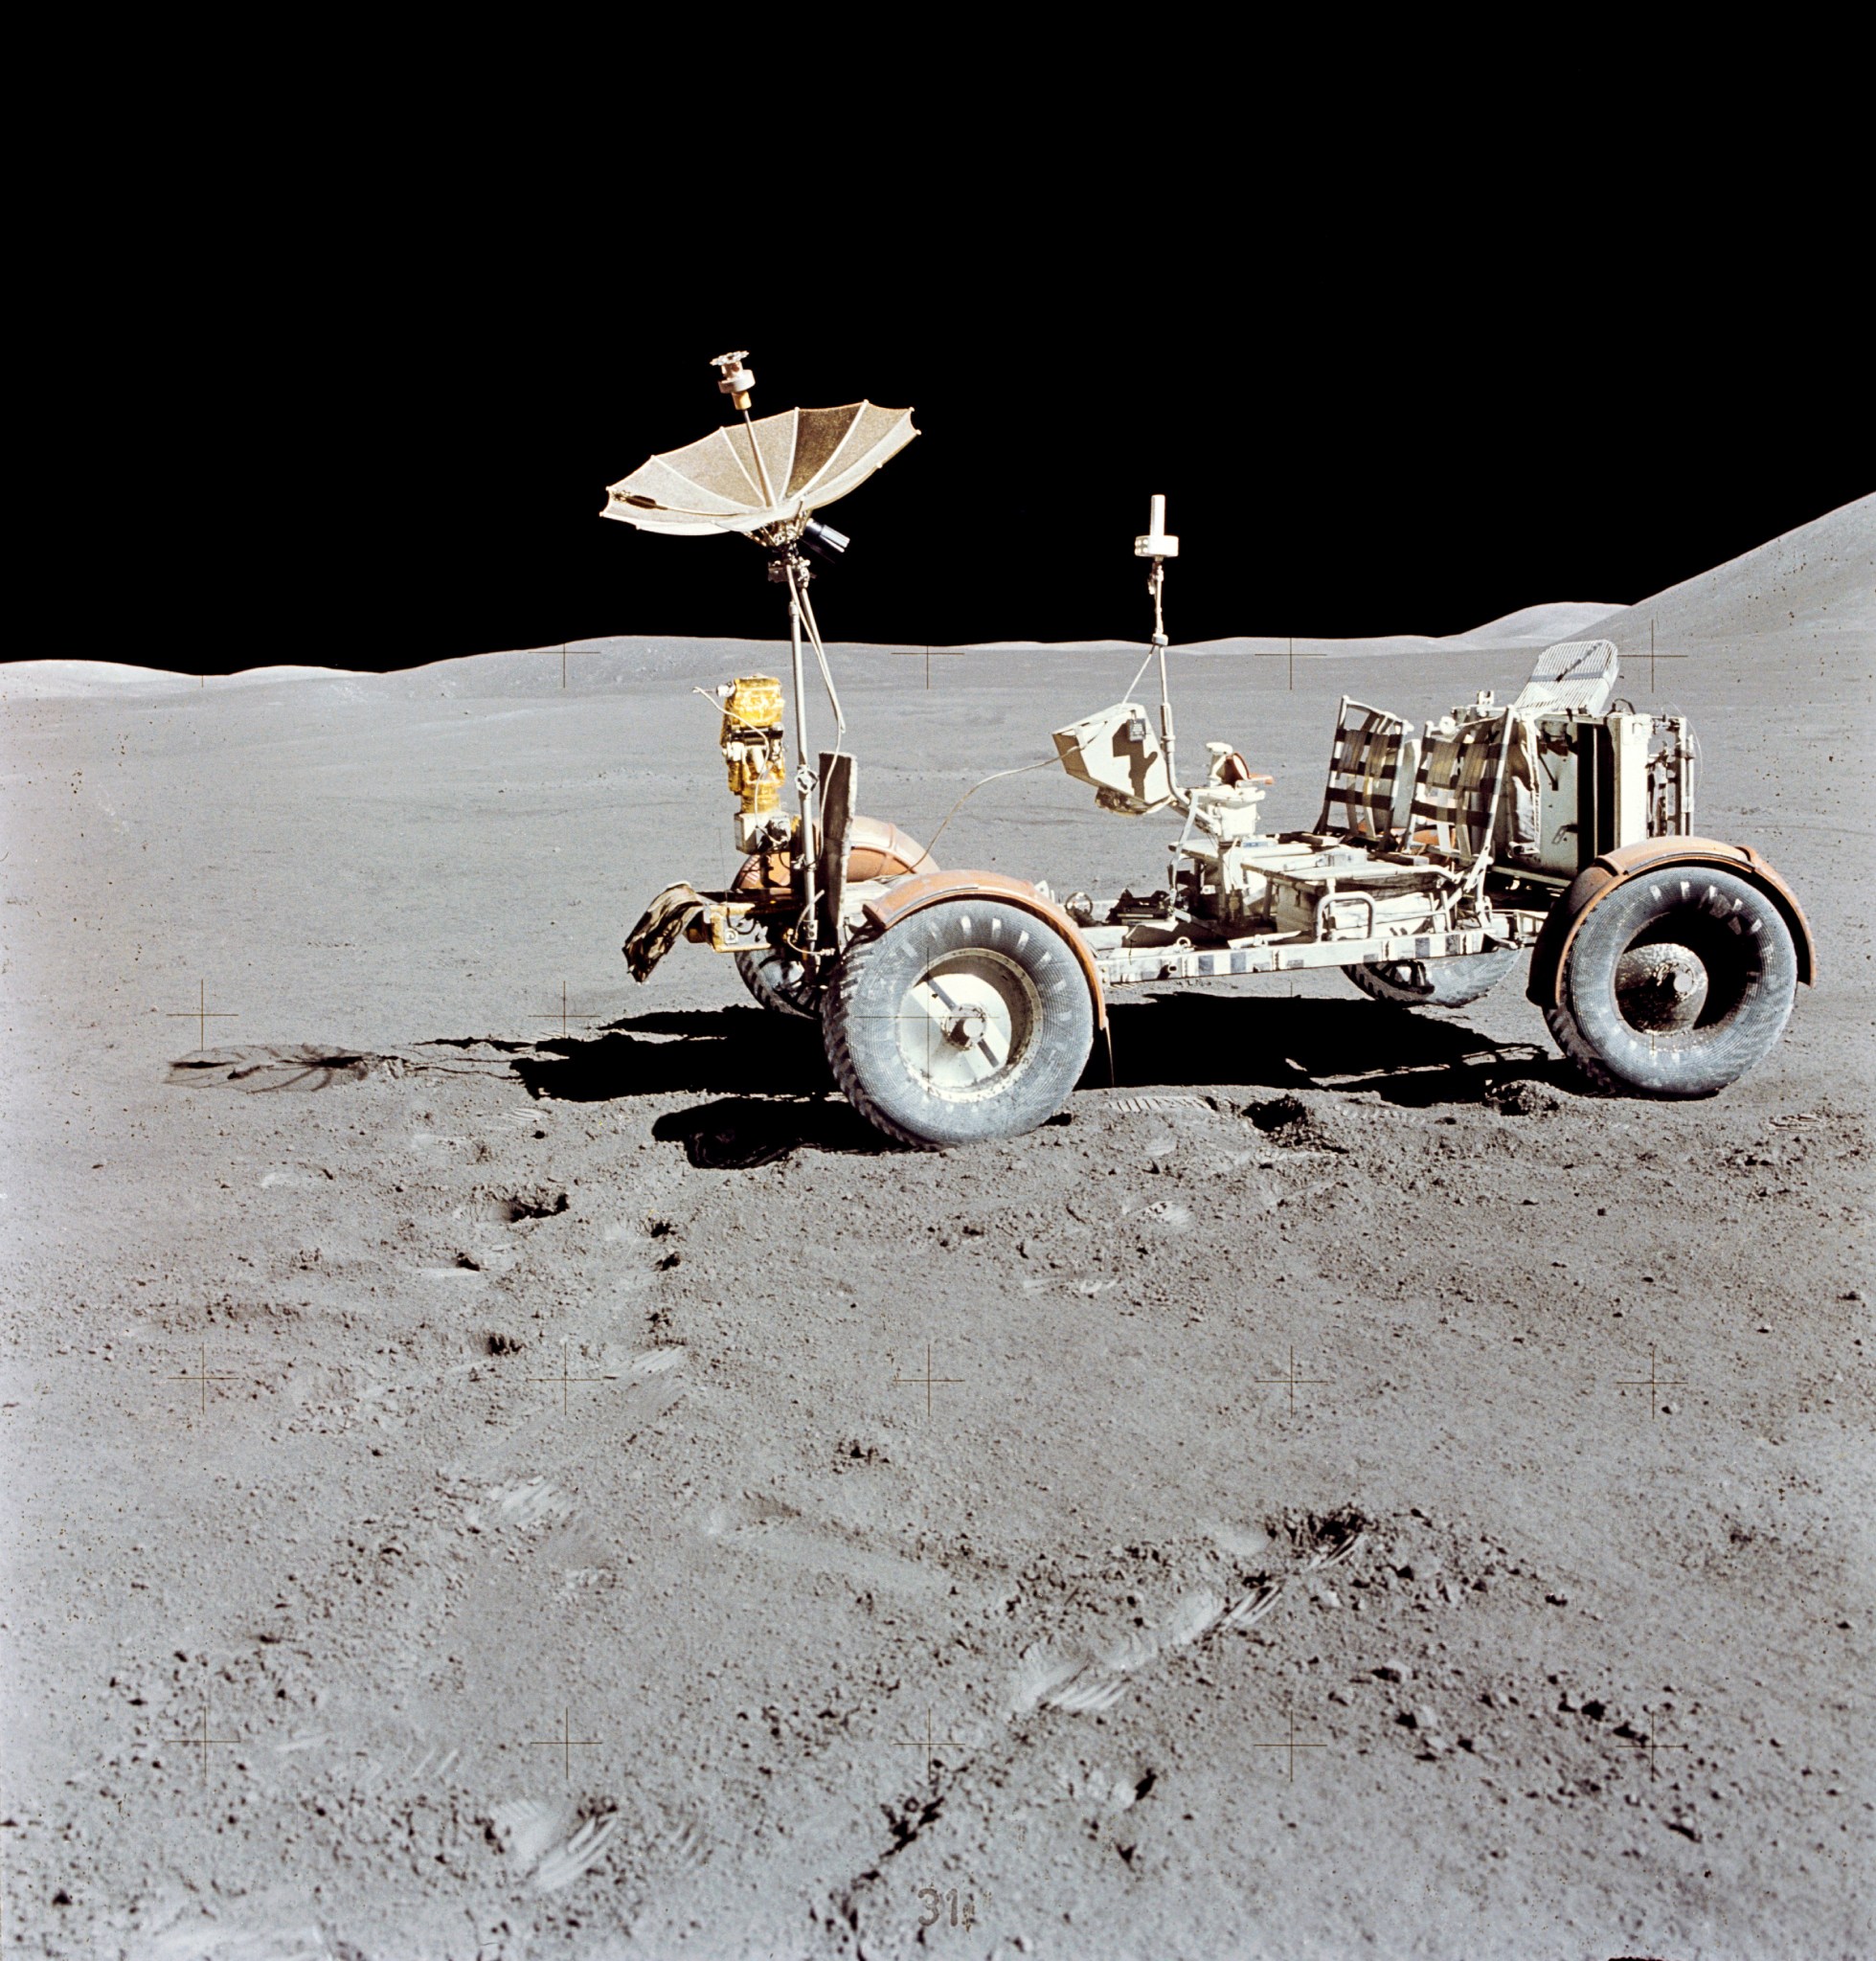 This week in 1971, Apollo 15 became the first mission to use the Lunar Roving Vehicle.